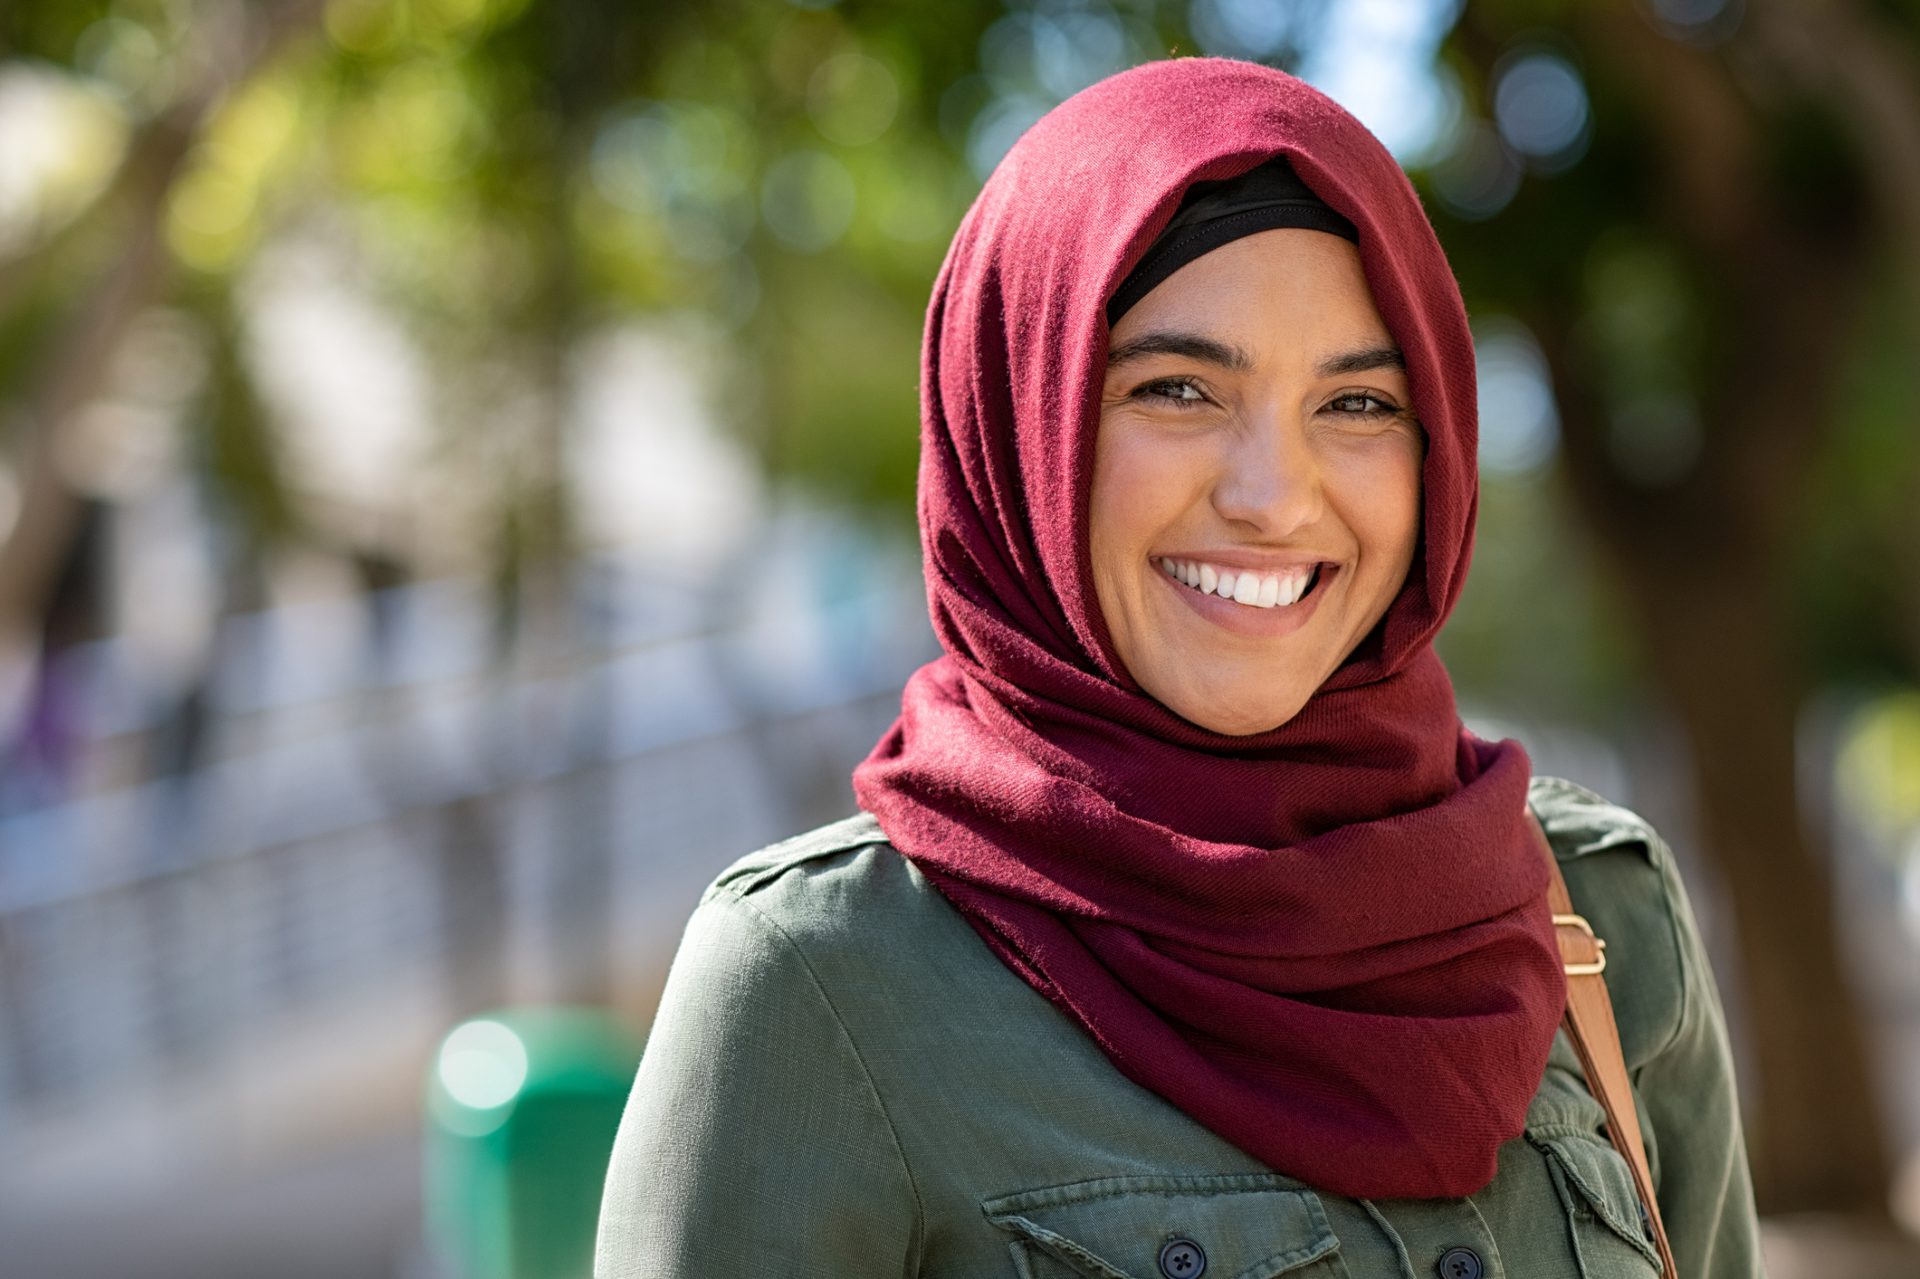 a young woman with dark eyes wearing a red hijab is standing outside and smiling at the camera